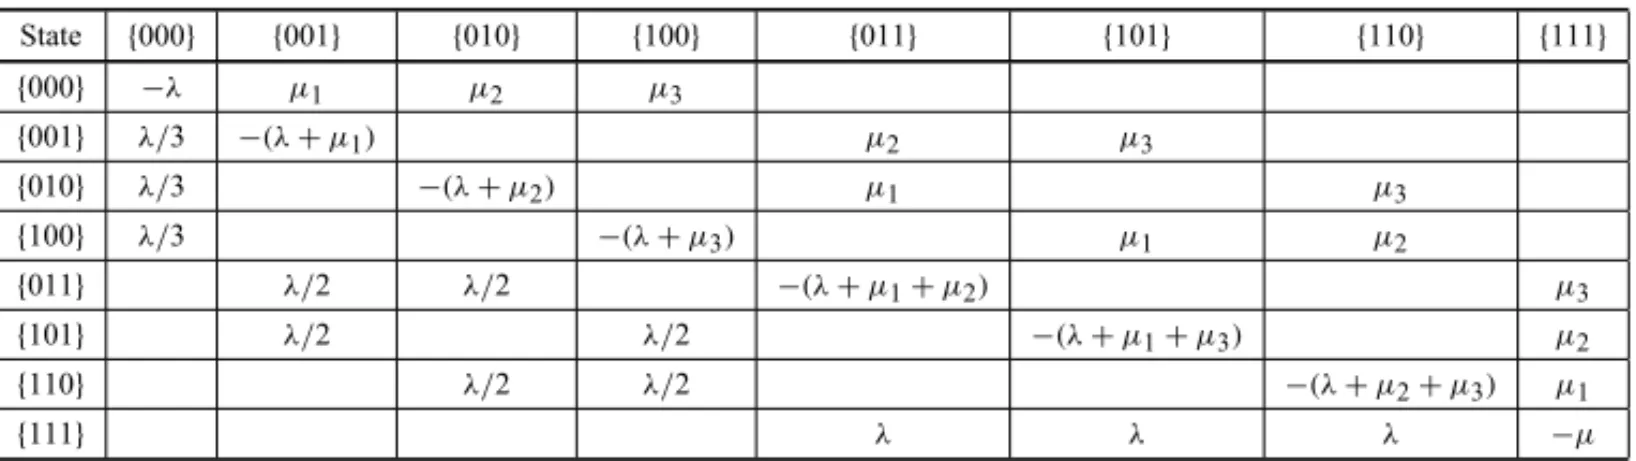 Table 8 – Coefficient matrix of the system of equations for the centralized model with random dispatches